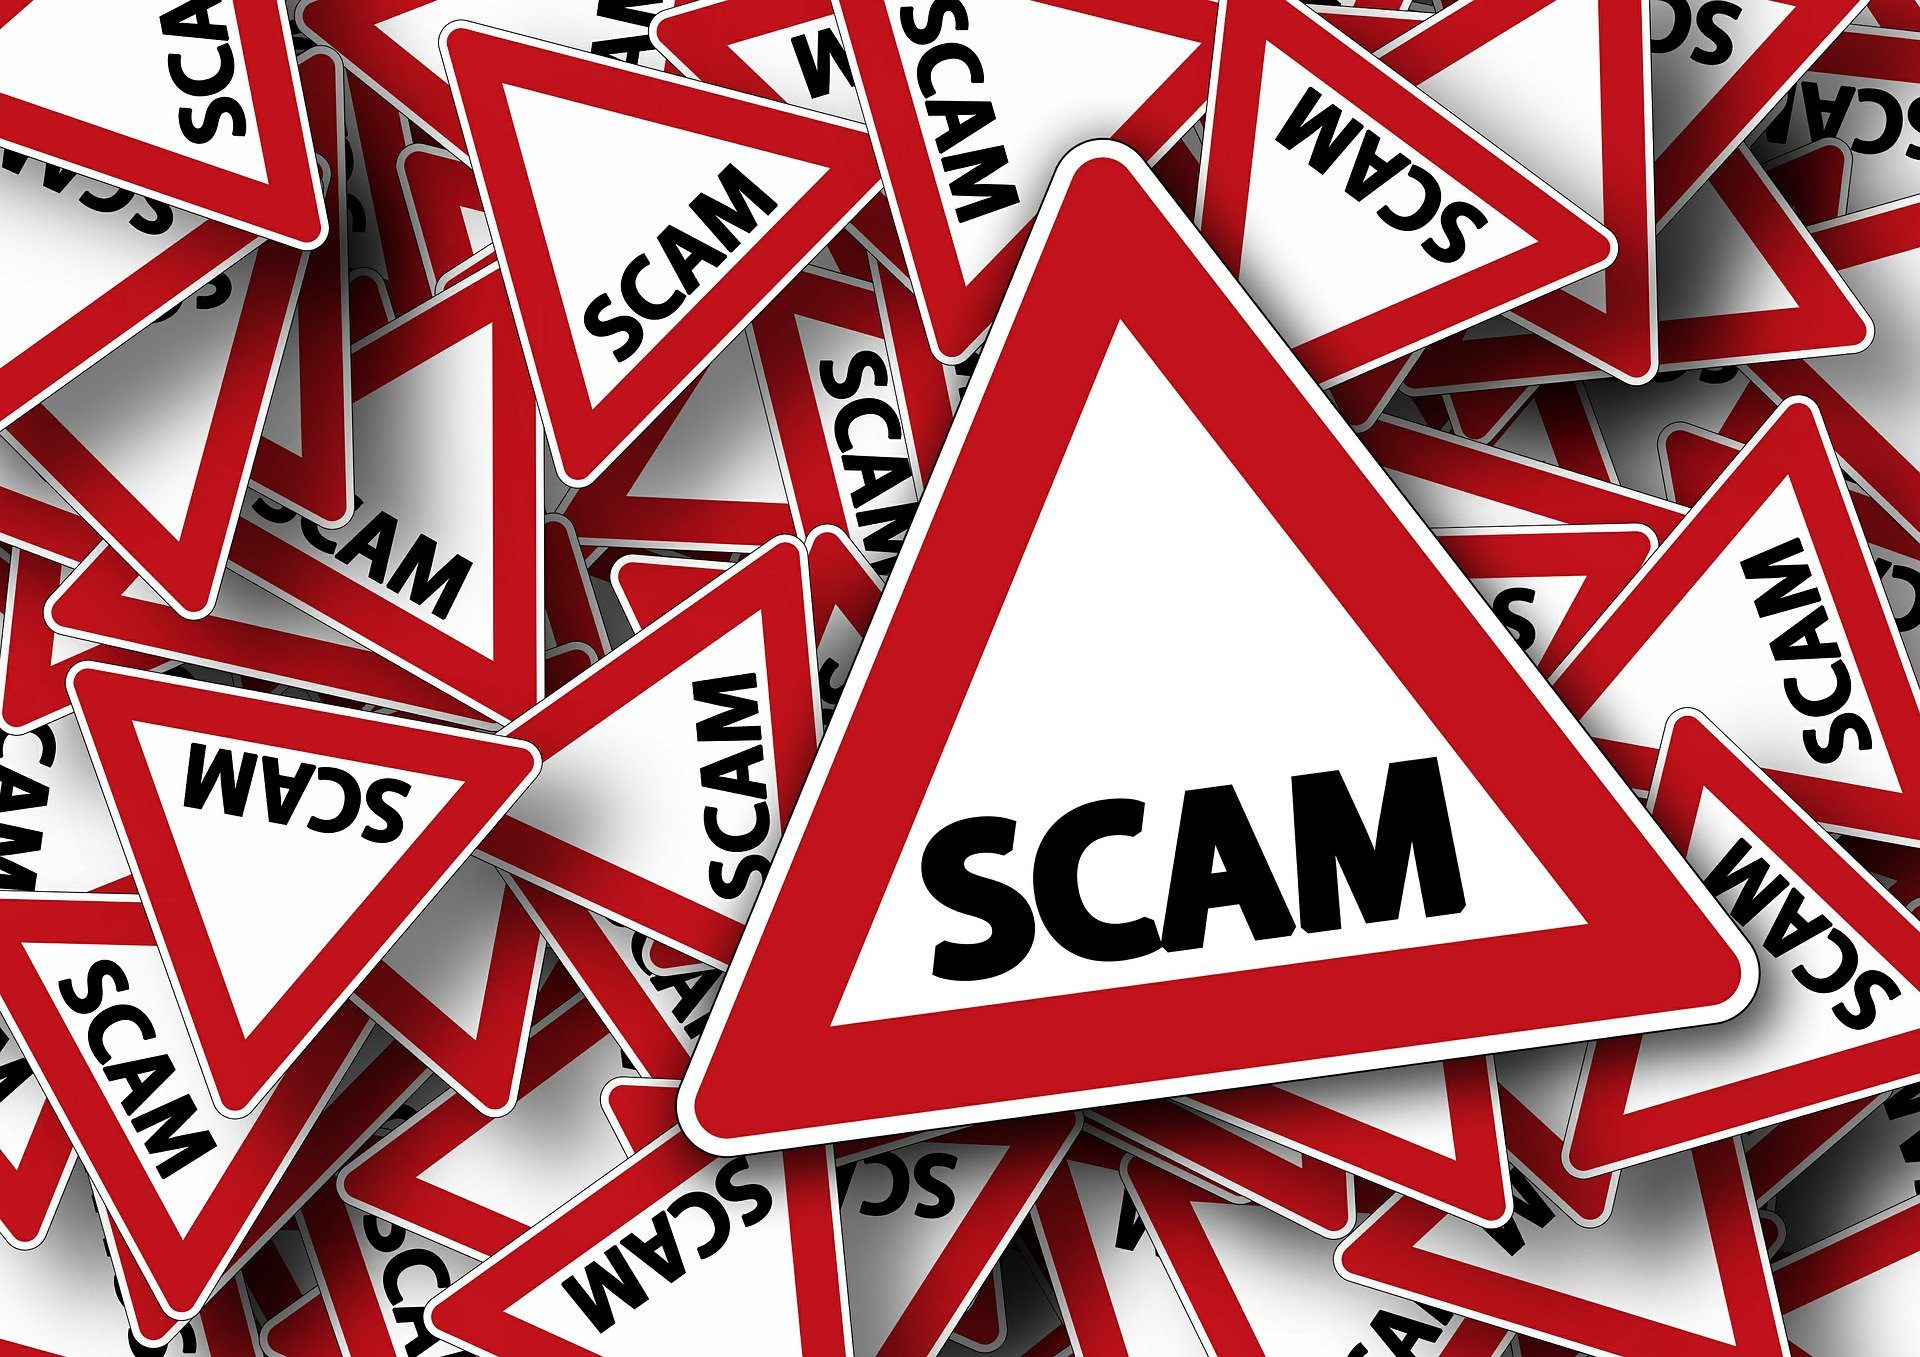 CPD-STANARDS-OFFICE-WARNS-OF-TRAINING-SCAMS-UK-PRESS-COVERAGE-SUMMER 2020